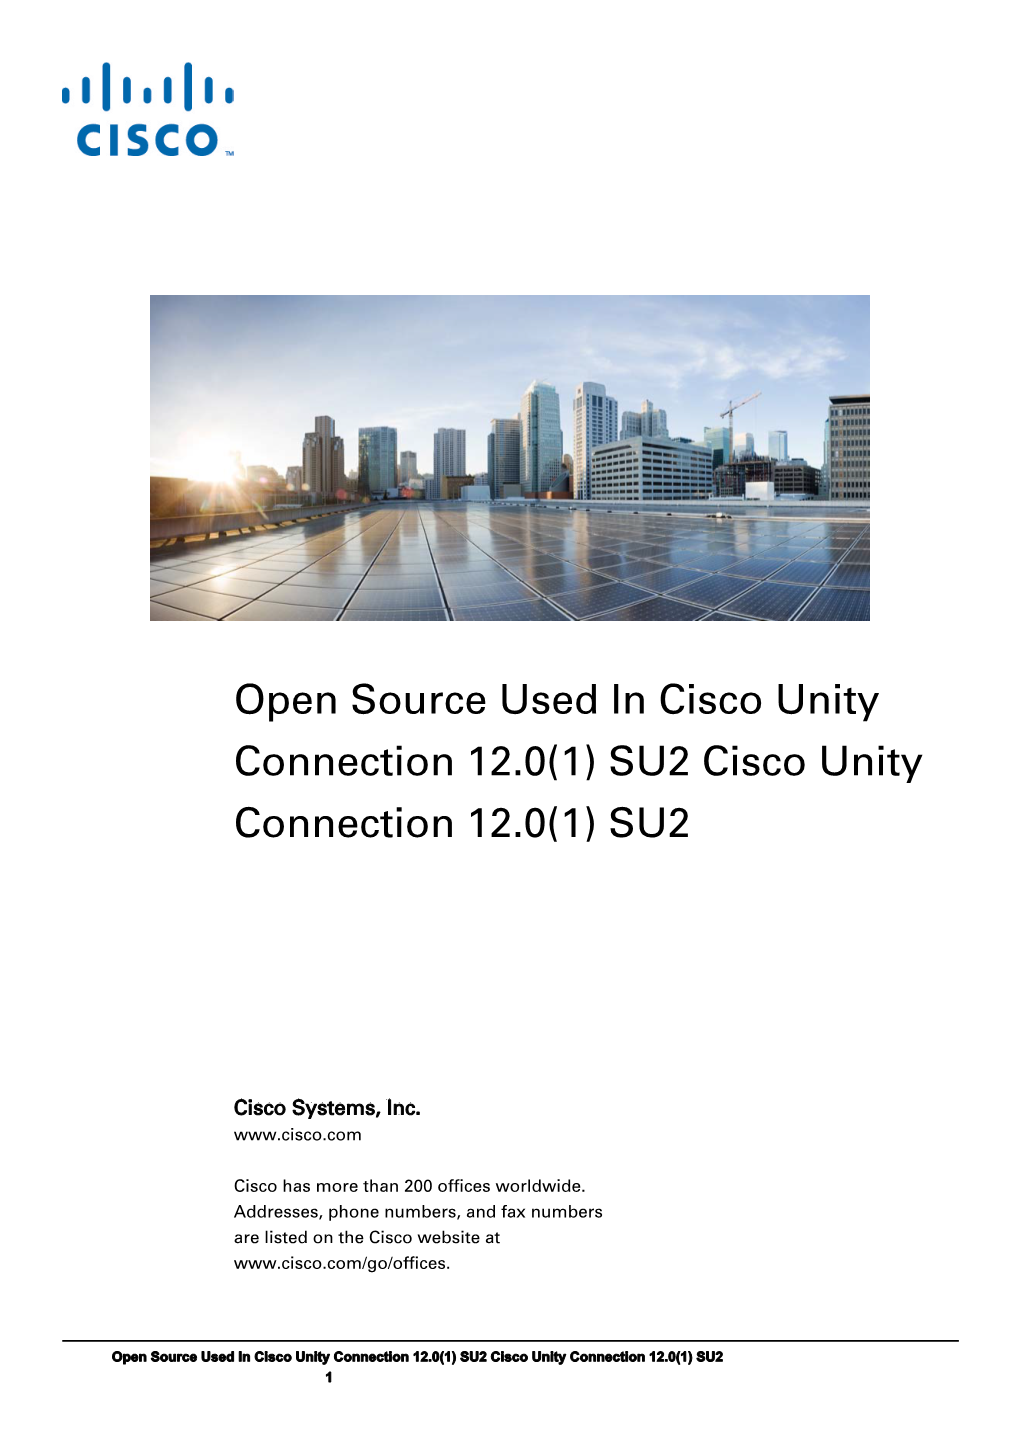 Licenses for Open-Source Software Included in Cisco Unity Connection